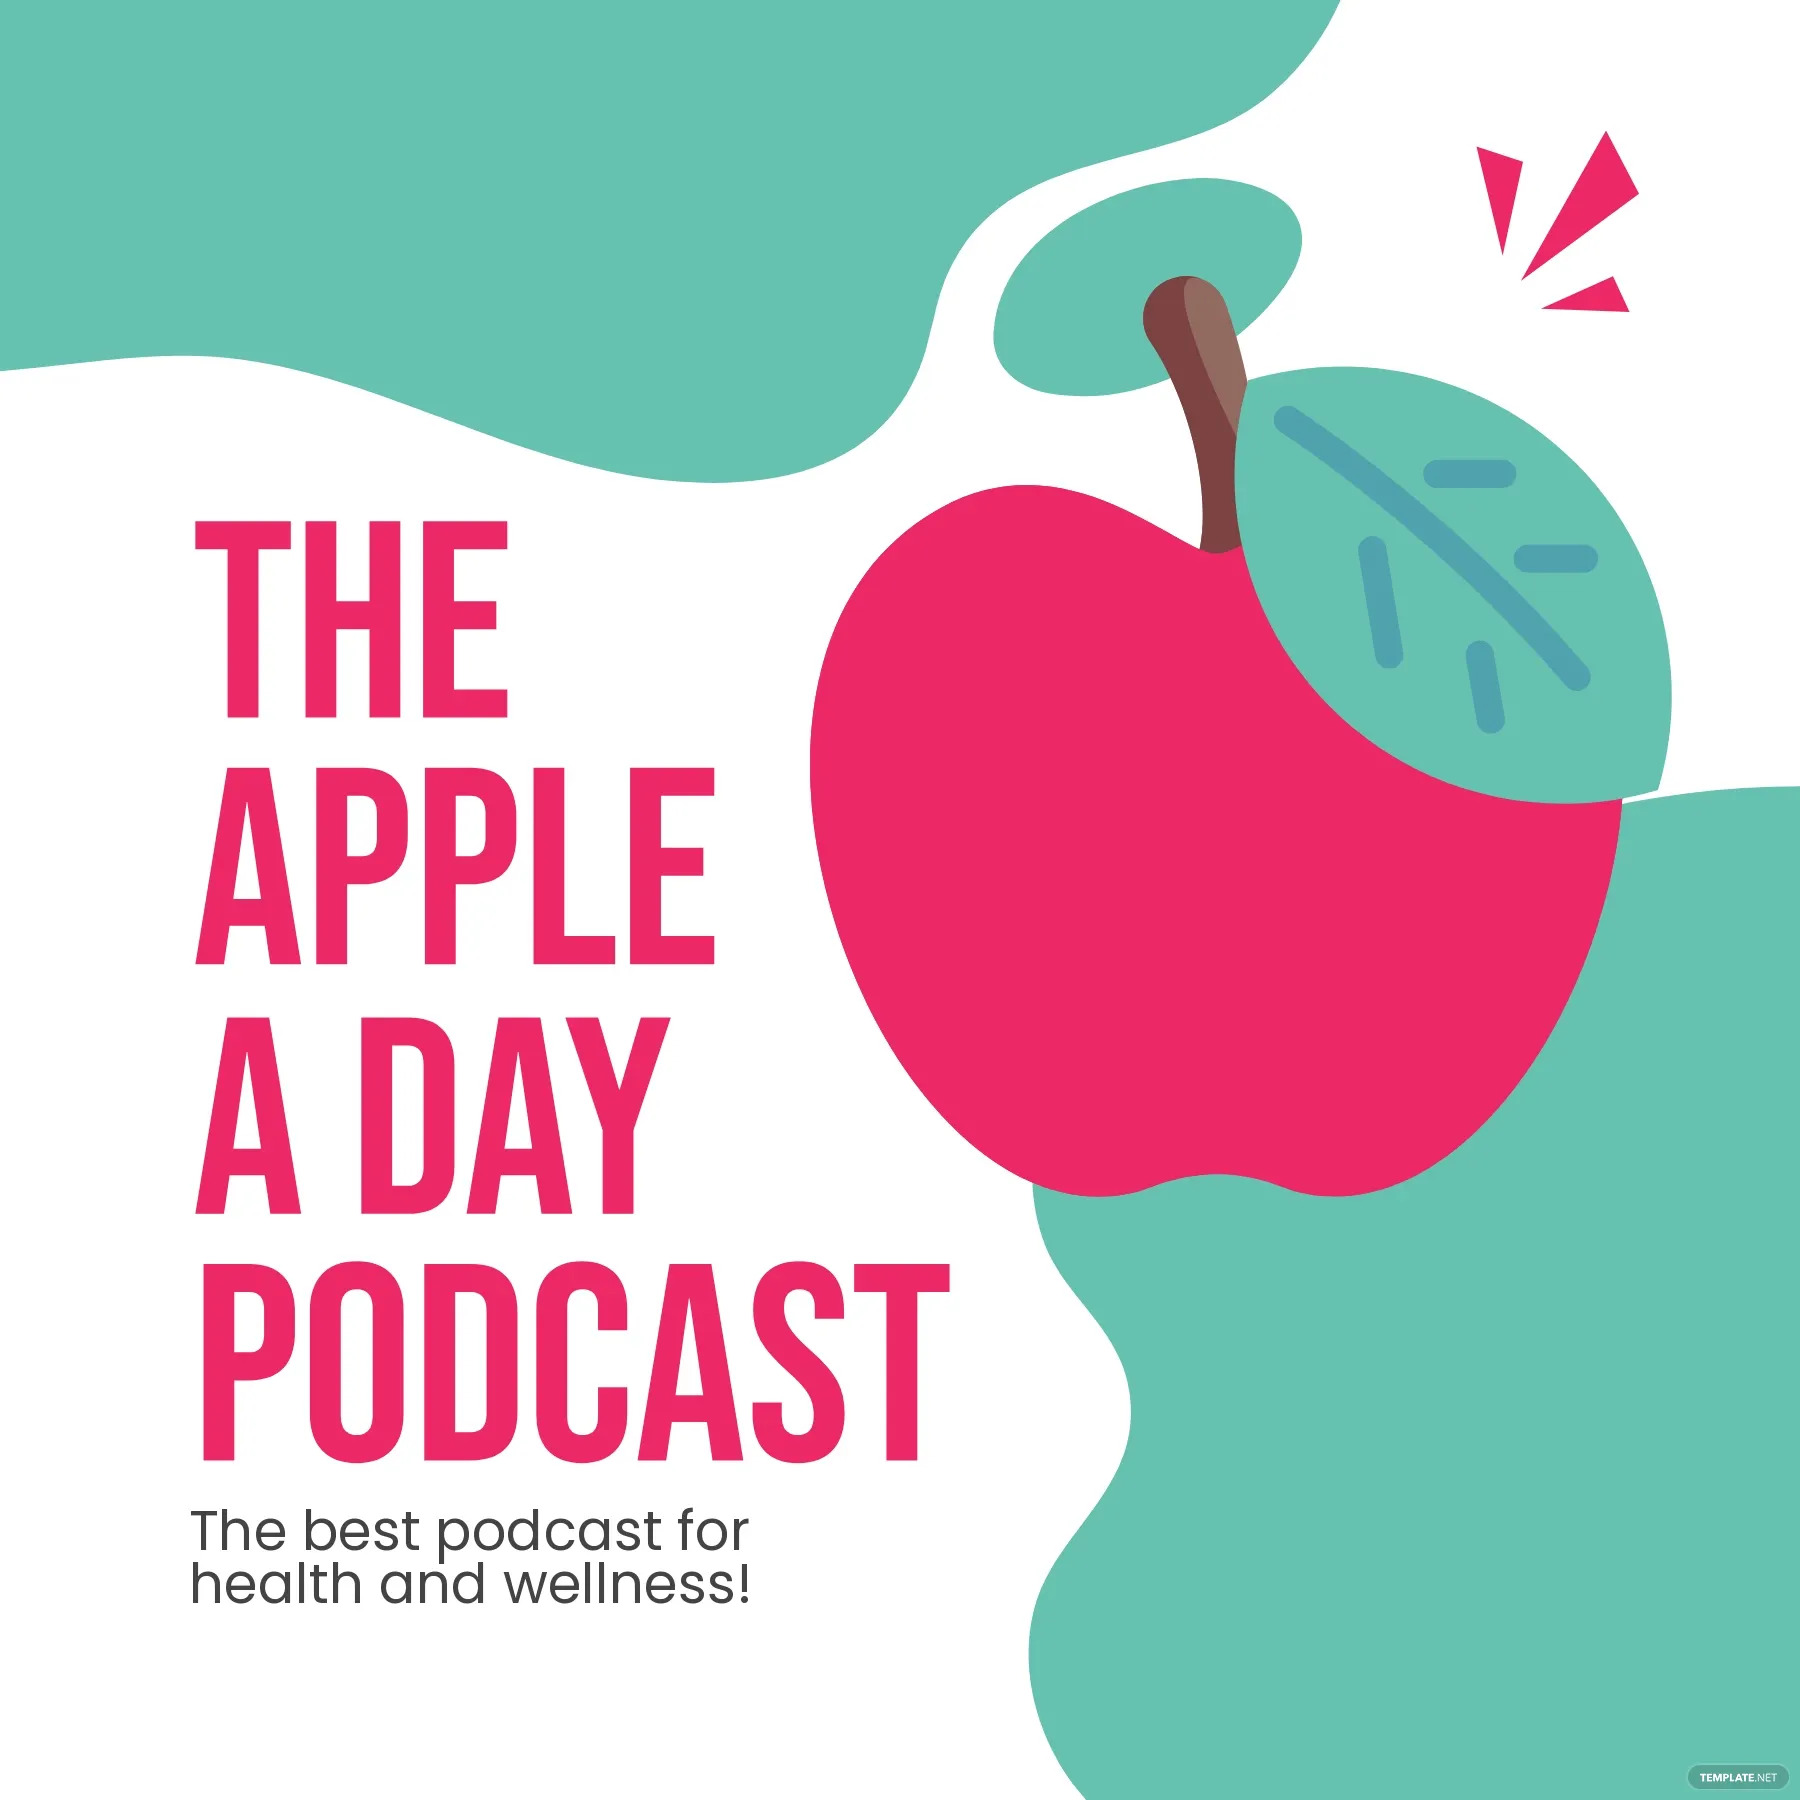 health and wellness podcast cover ideas and examples